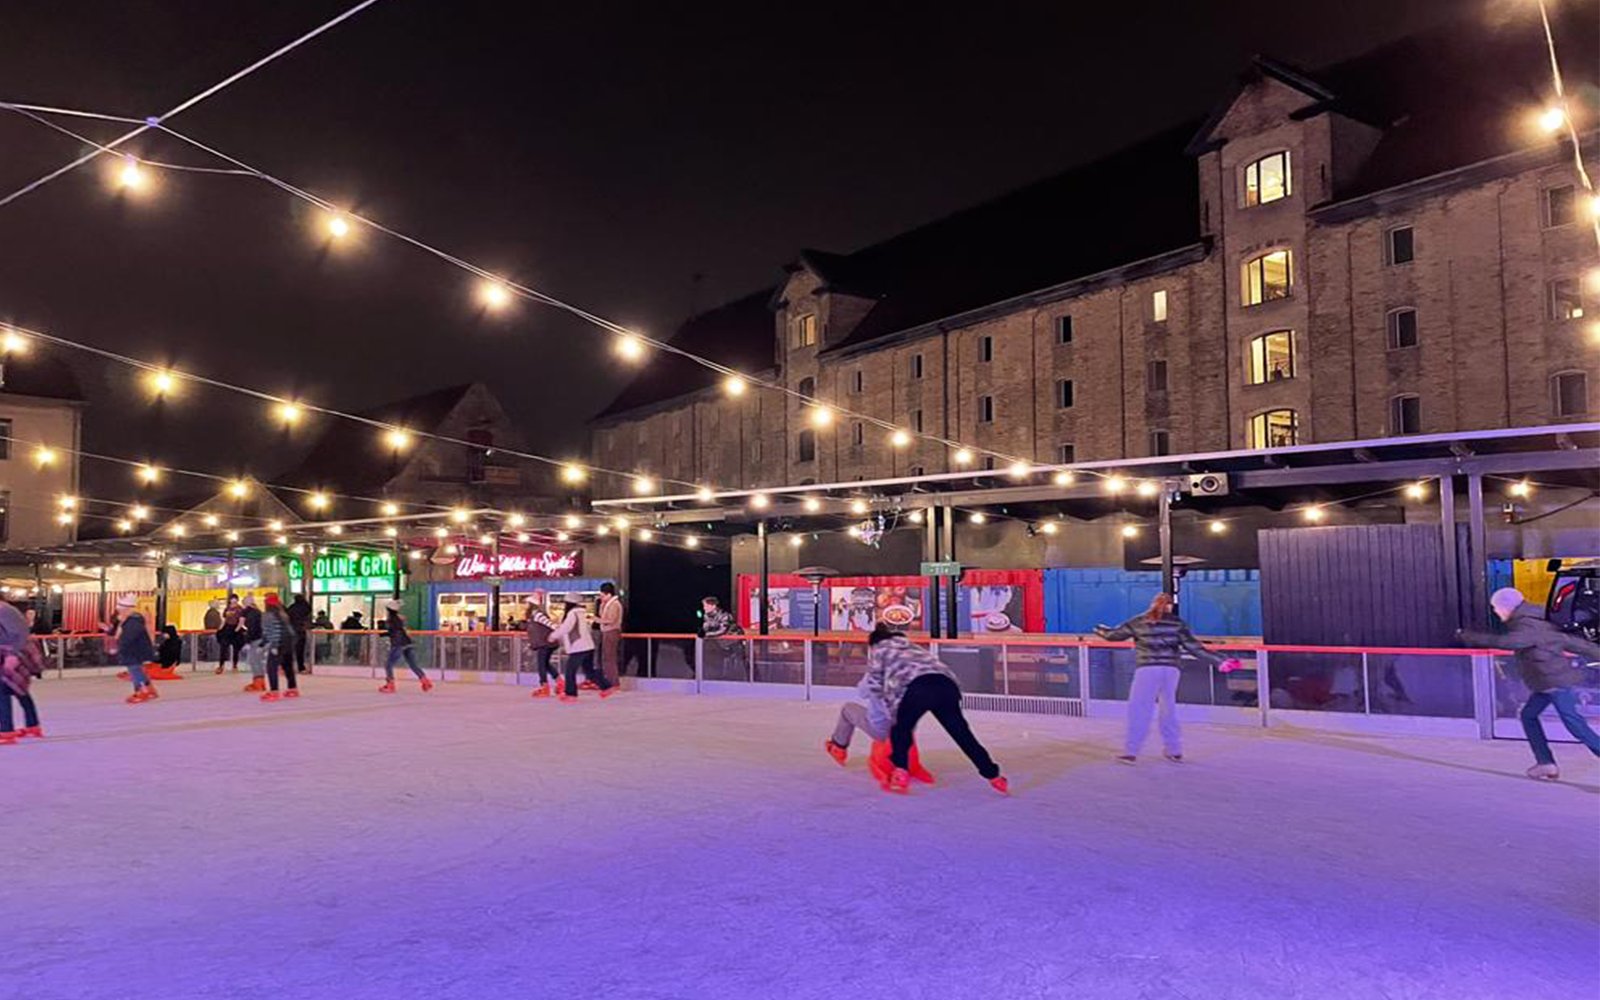 People ice skating on outdoor rink illuminated by string lights next to building at night